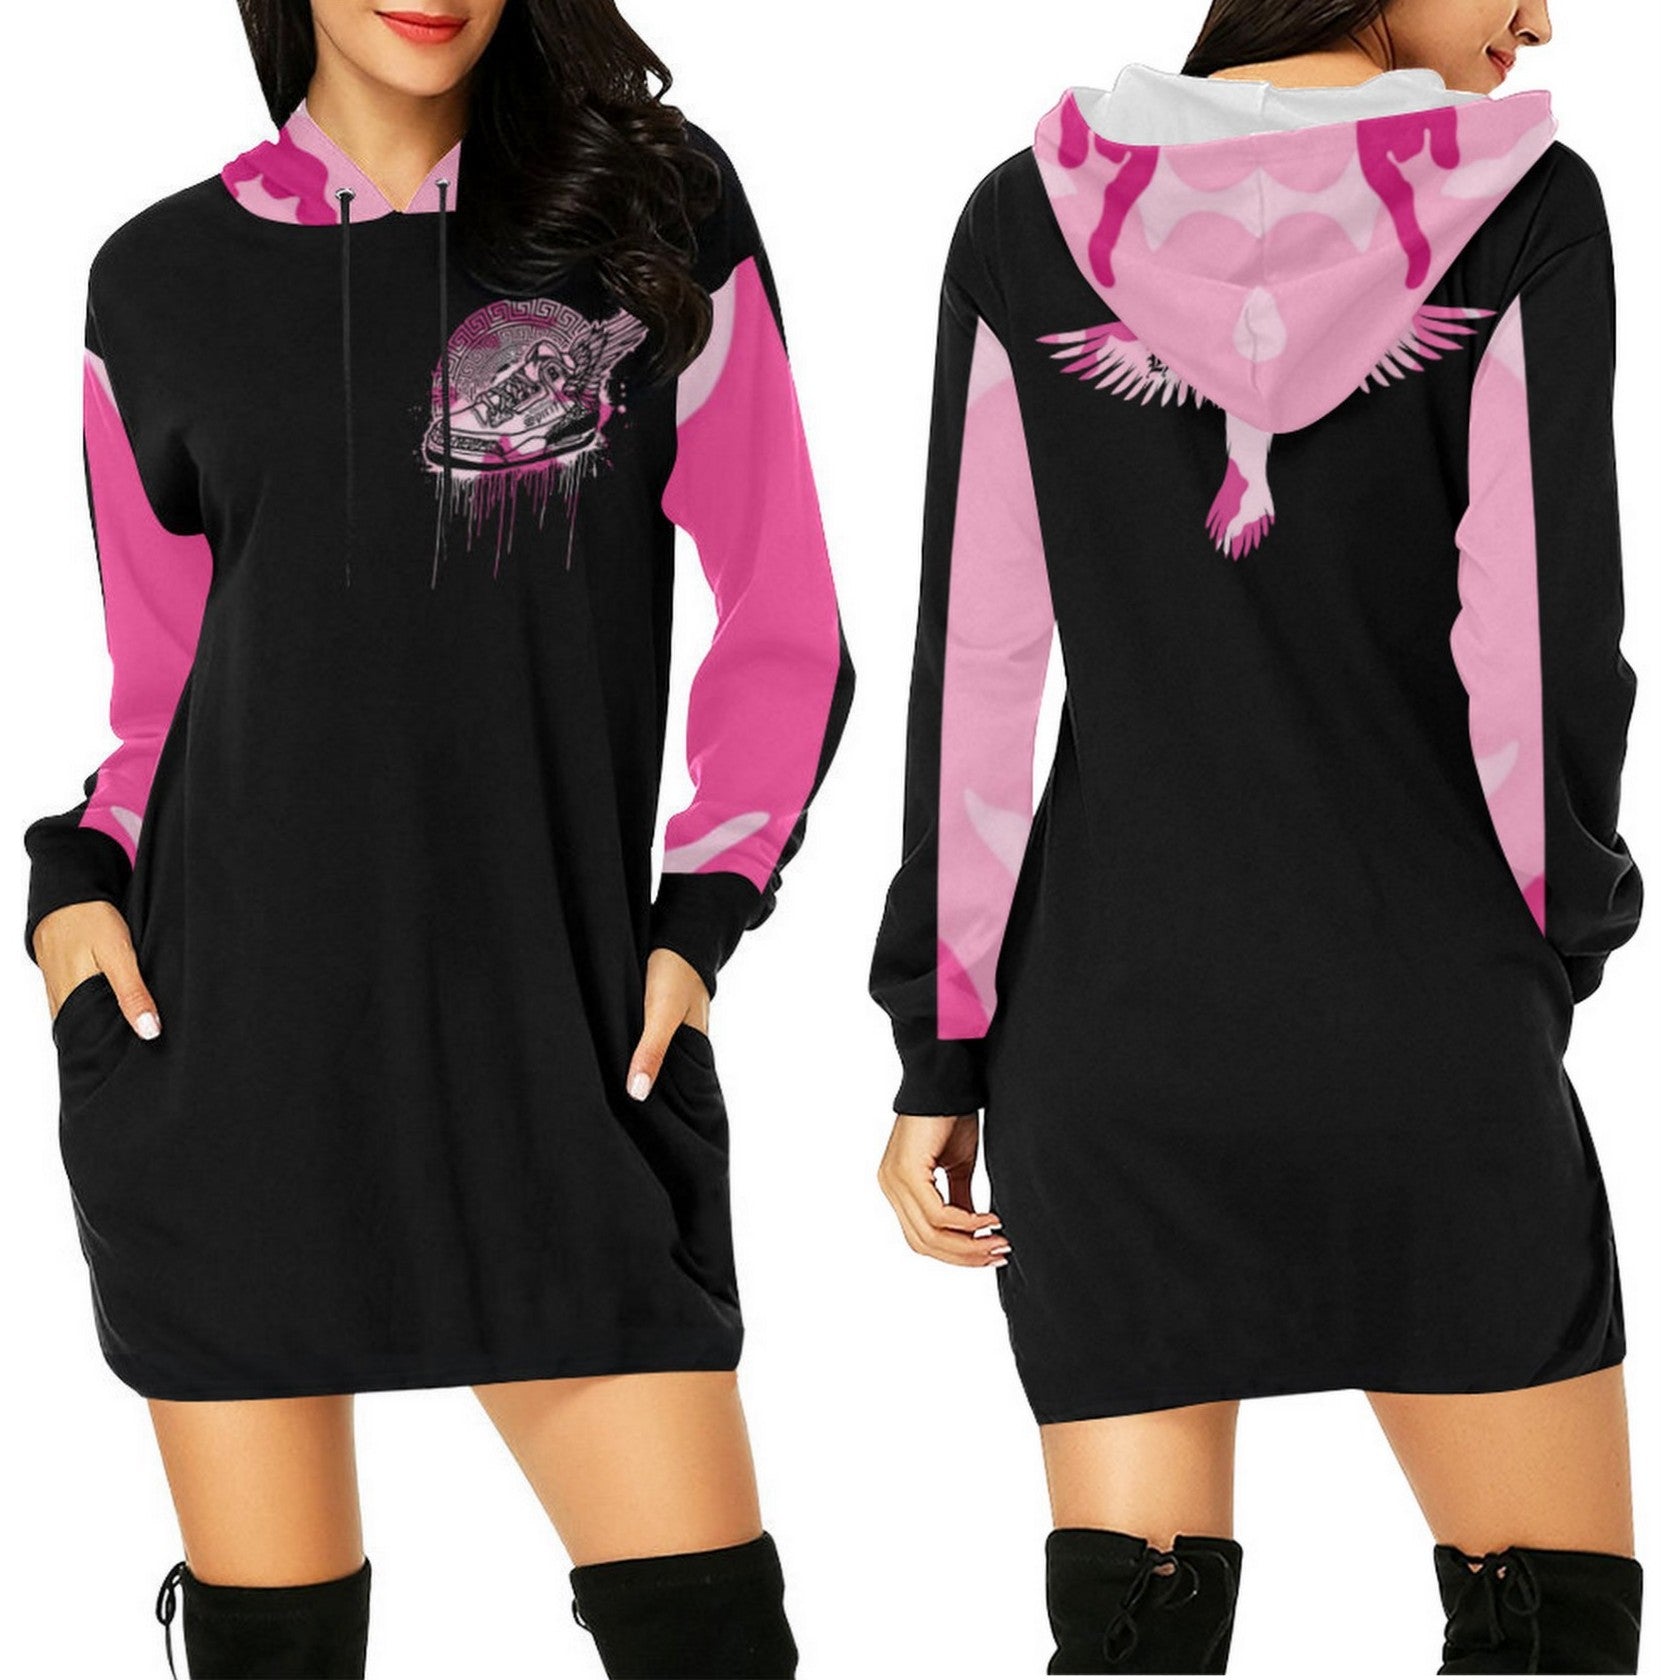 Footsteps Pink Cotton Candy Hoody Dress